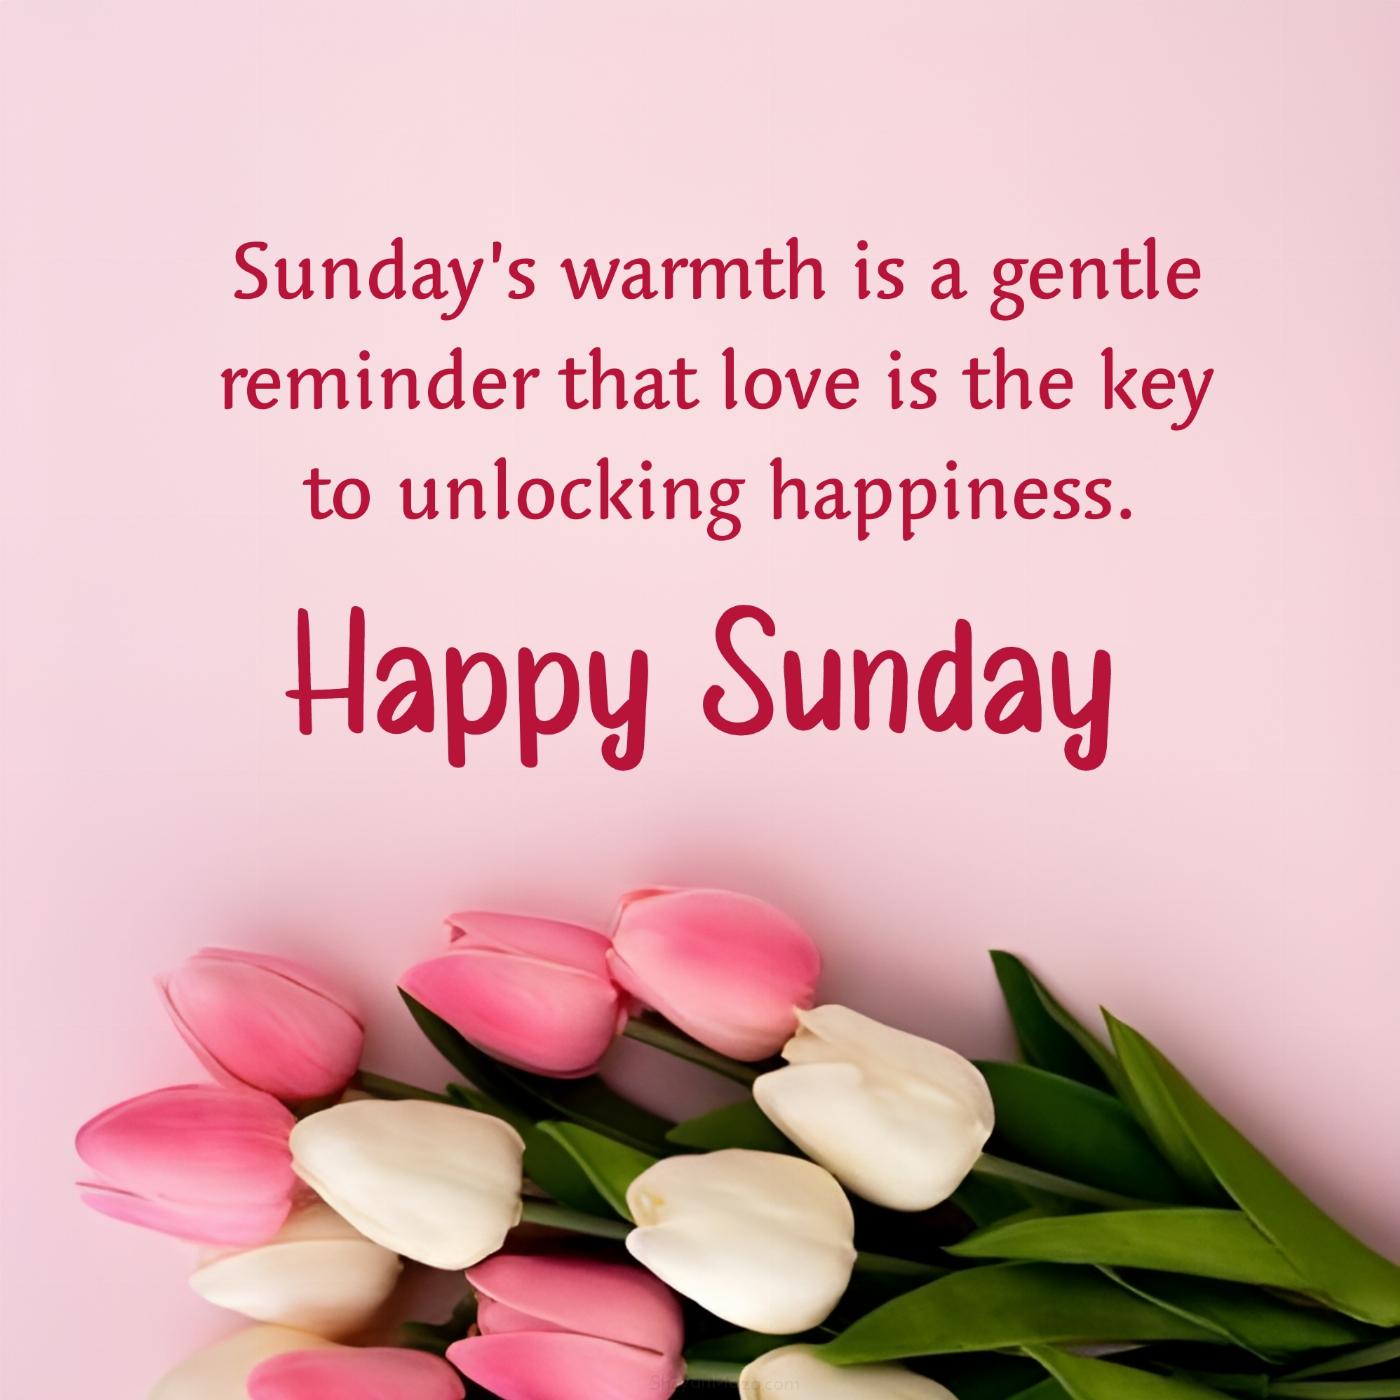 Sundays warmth is a gentle reminder that love is the key to unlocking happiness